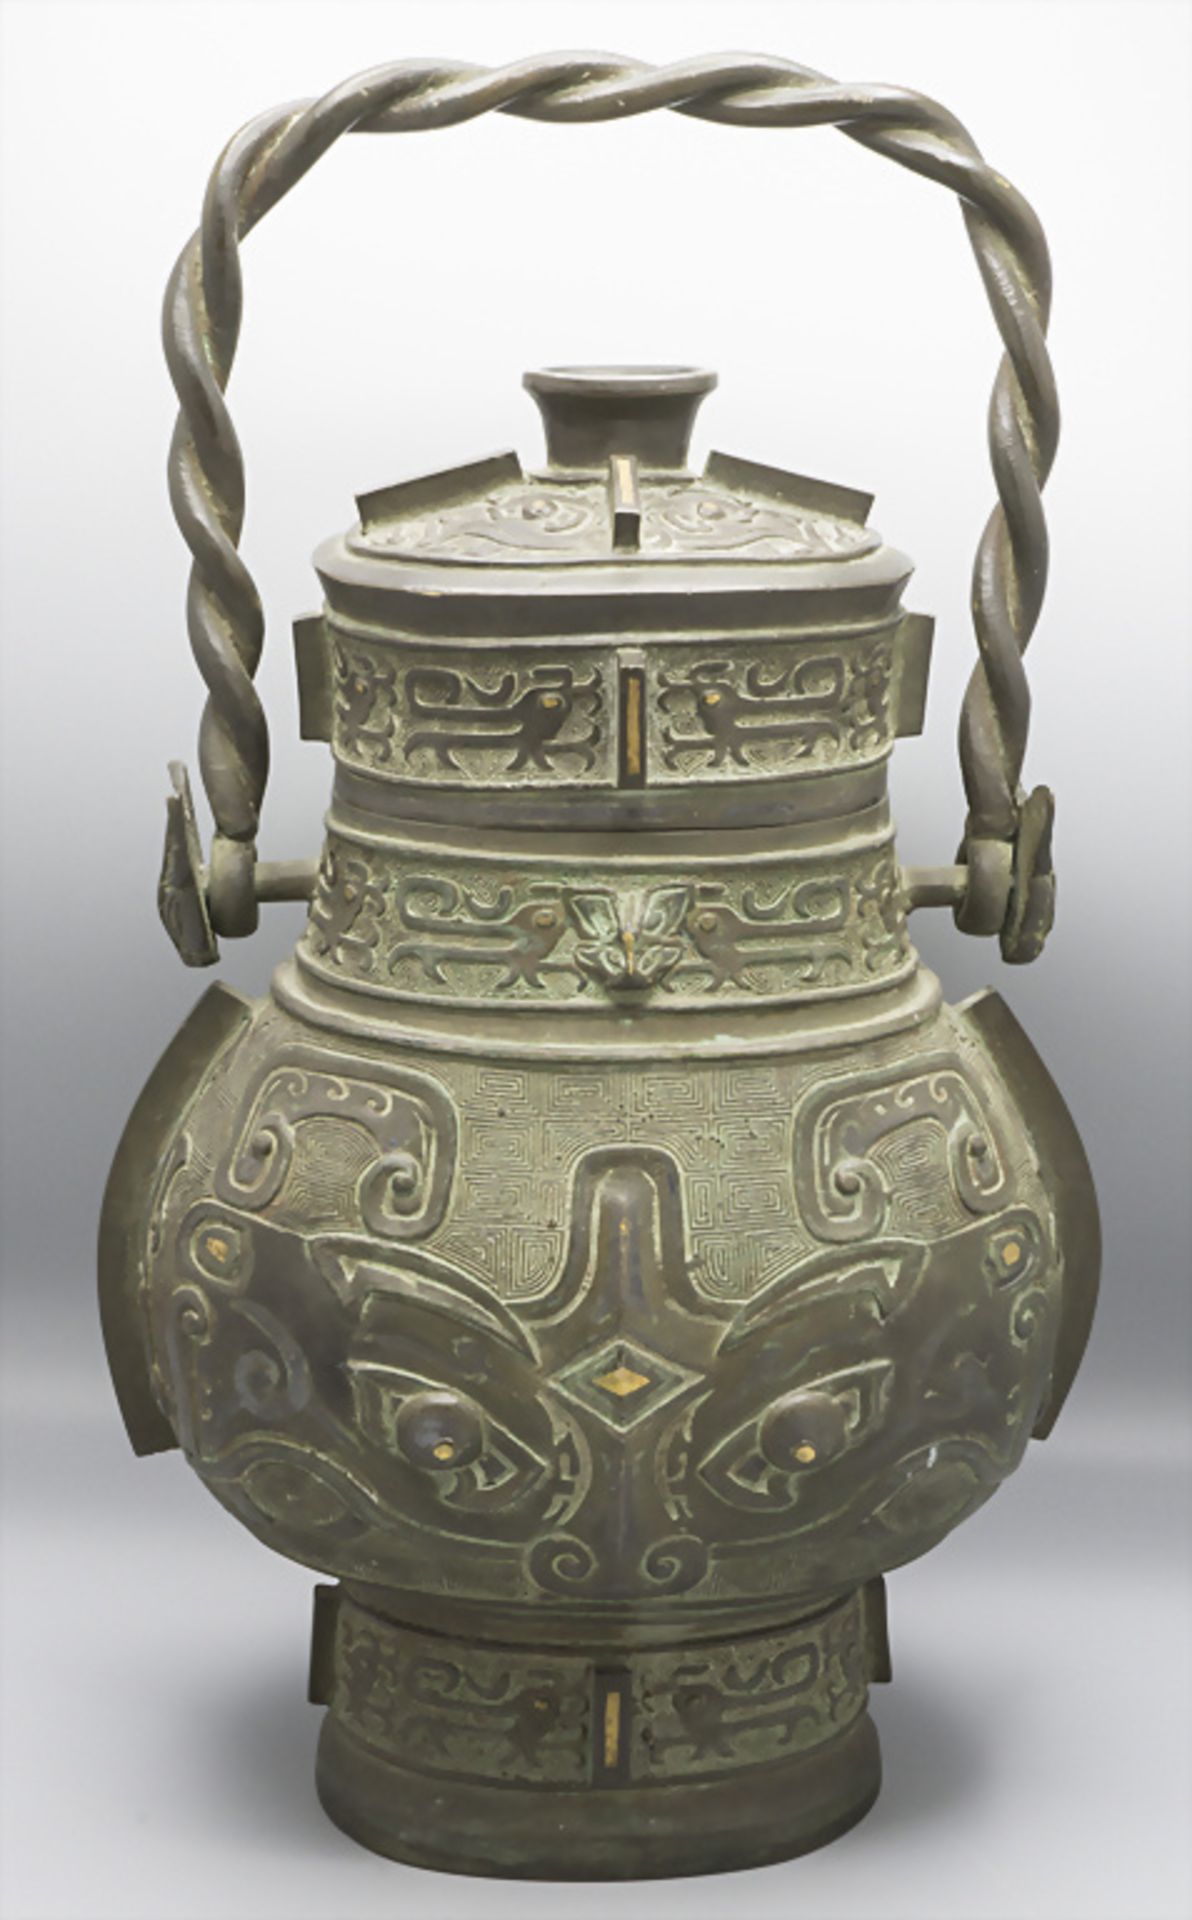 Großer Henkel-Ritualbehälter / A large bronze ritual vessel with handle, China, Ming/Qing-Dynastie